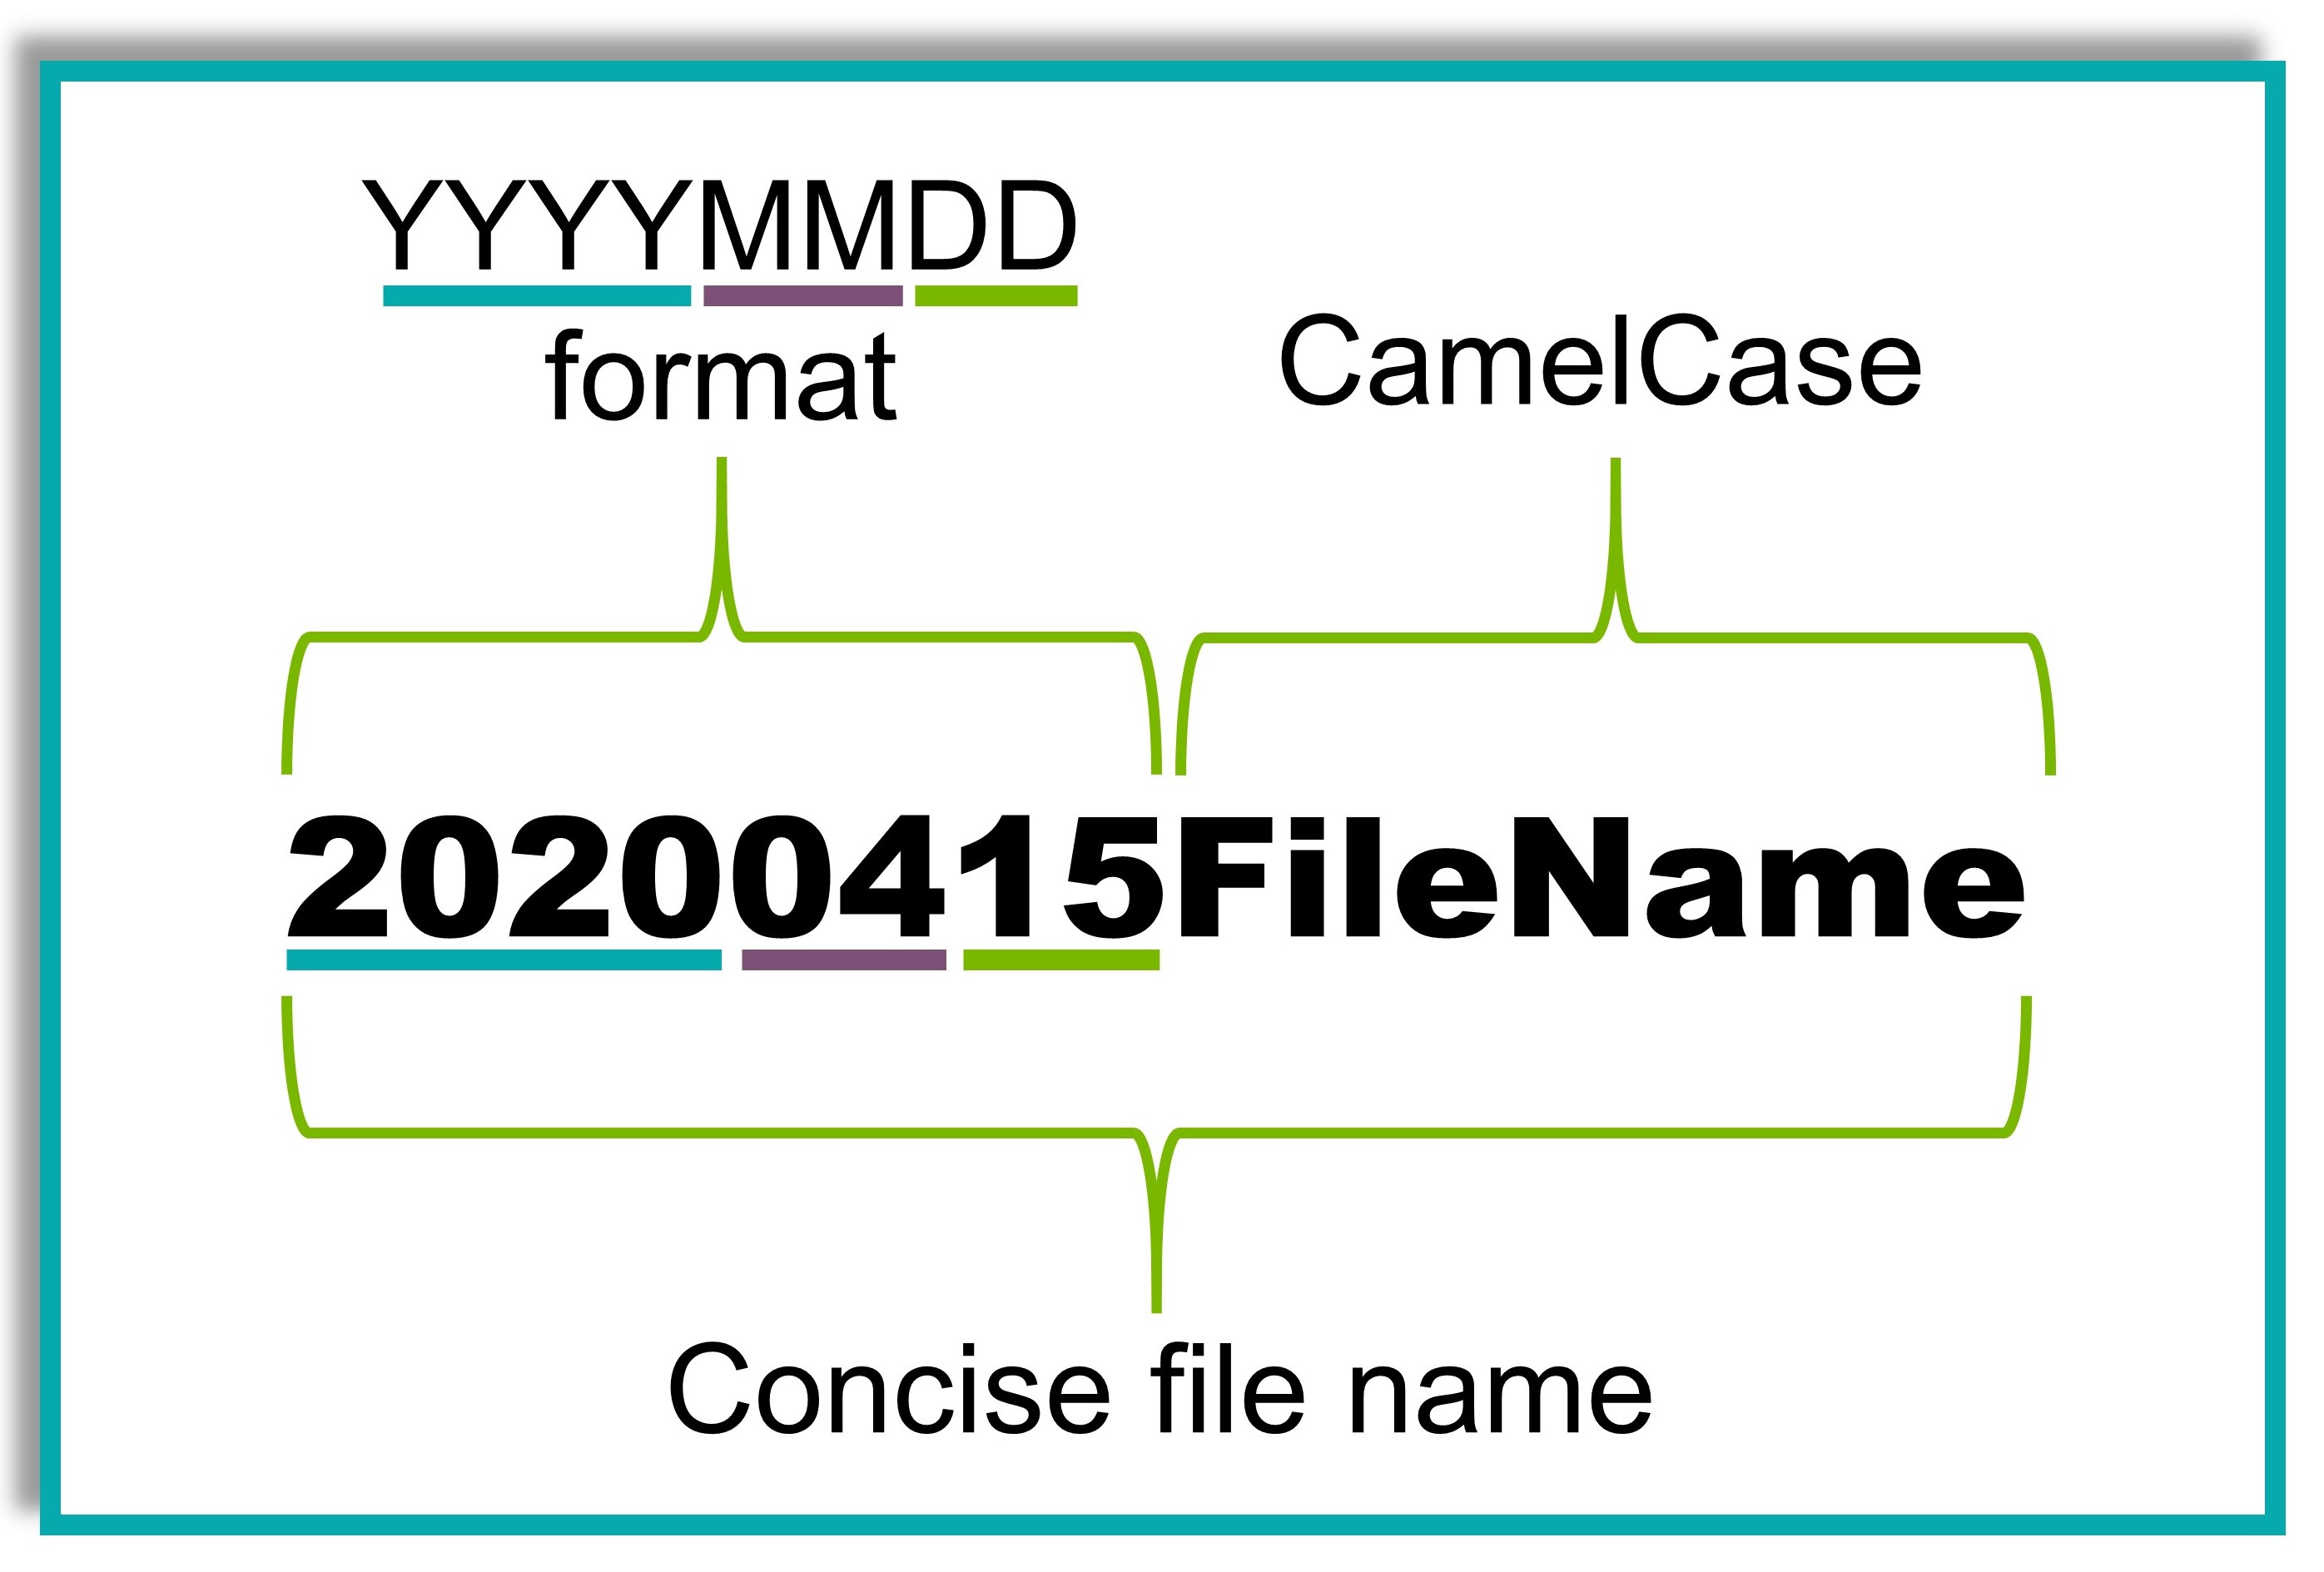 Figure 5.5.3 Example of best practice file naming 